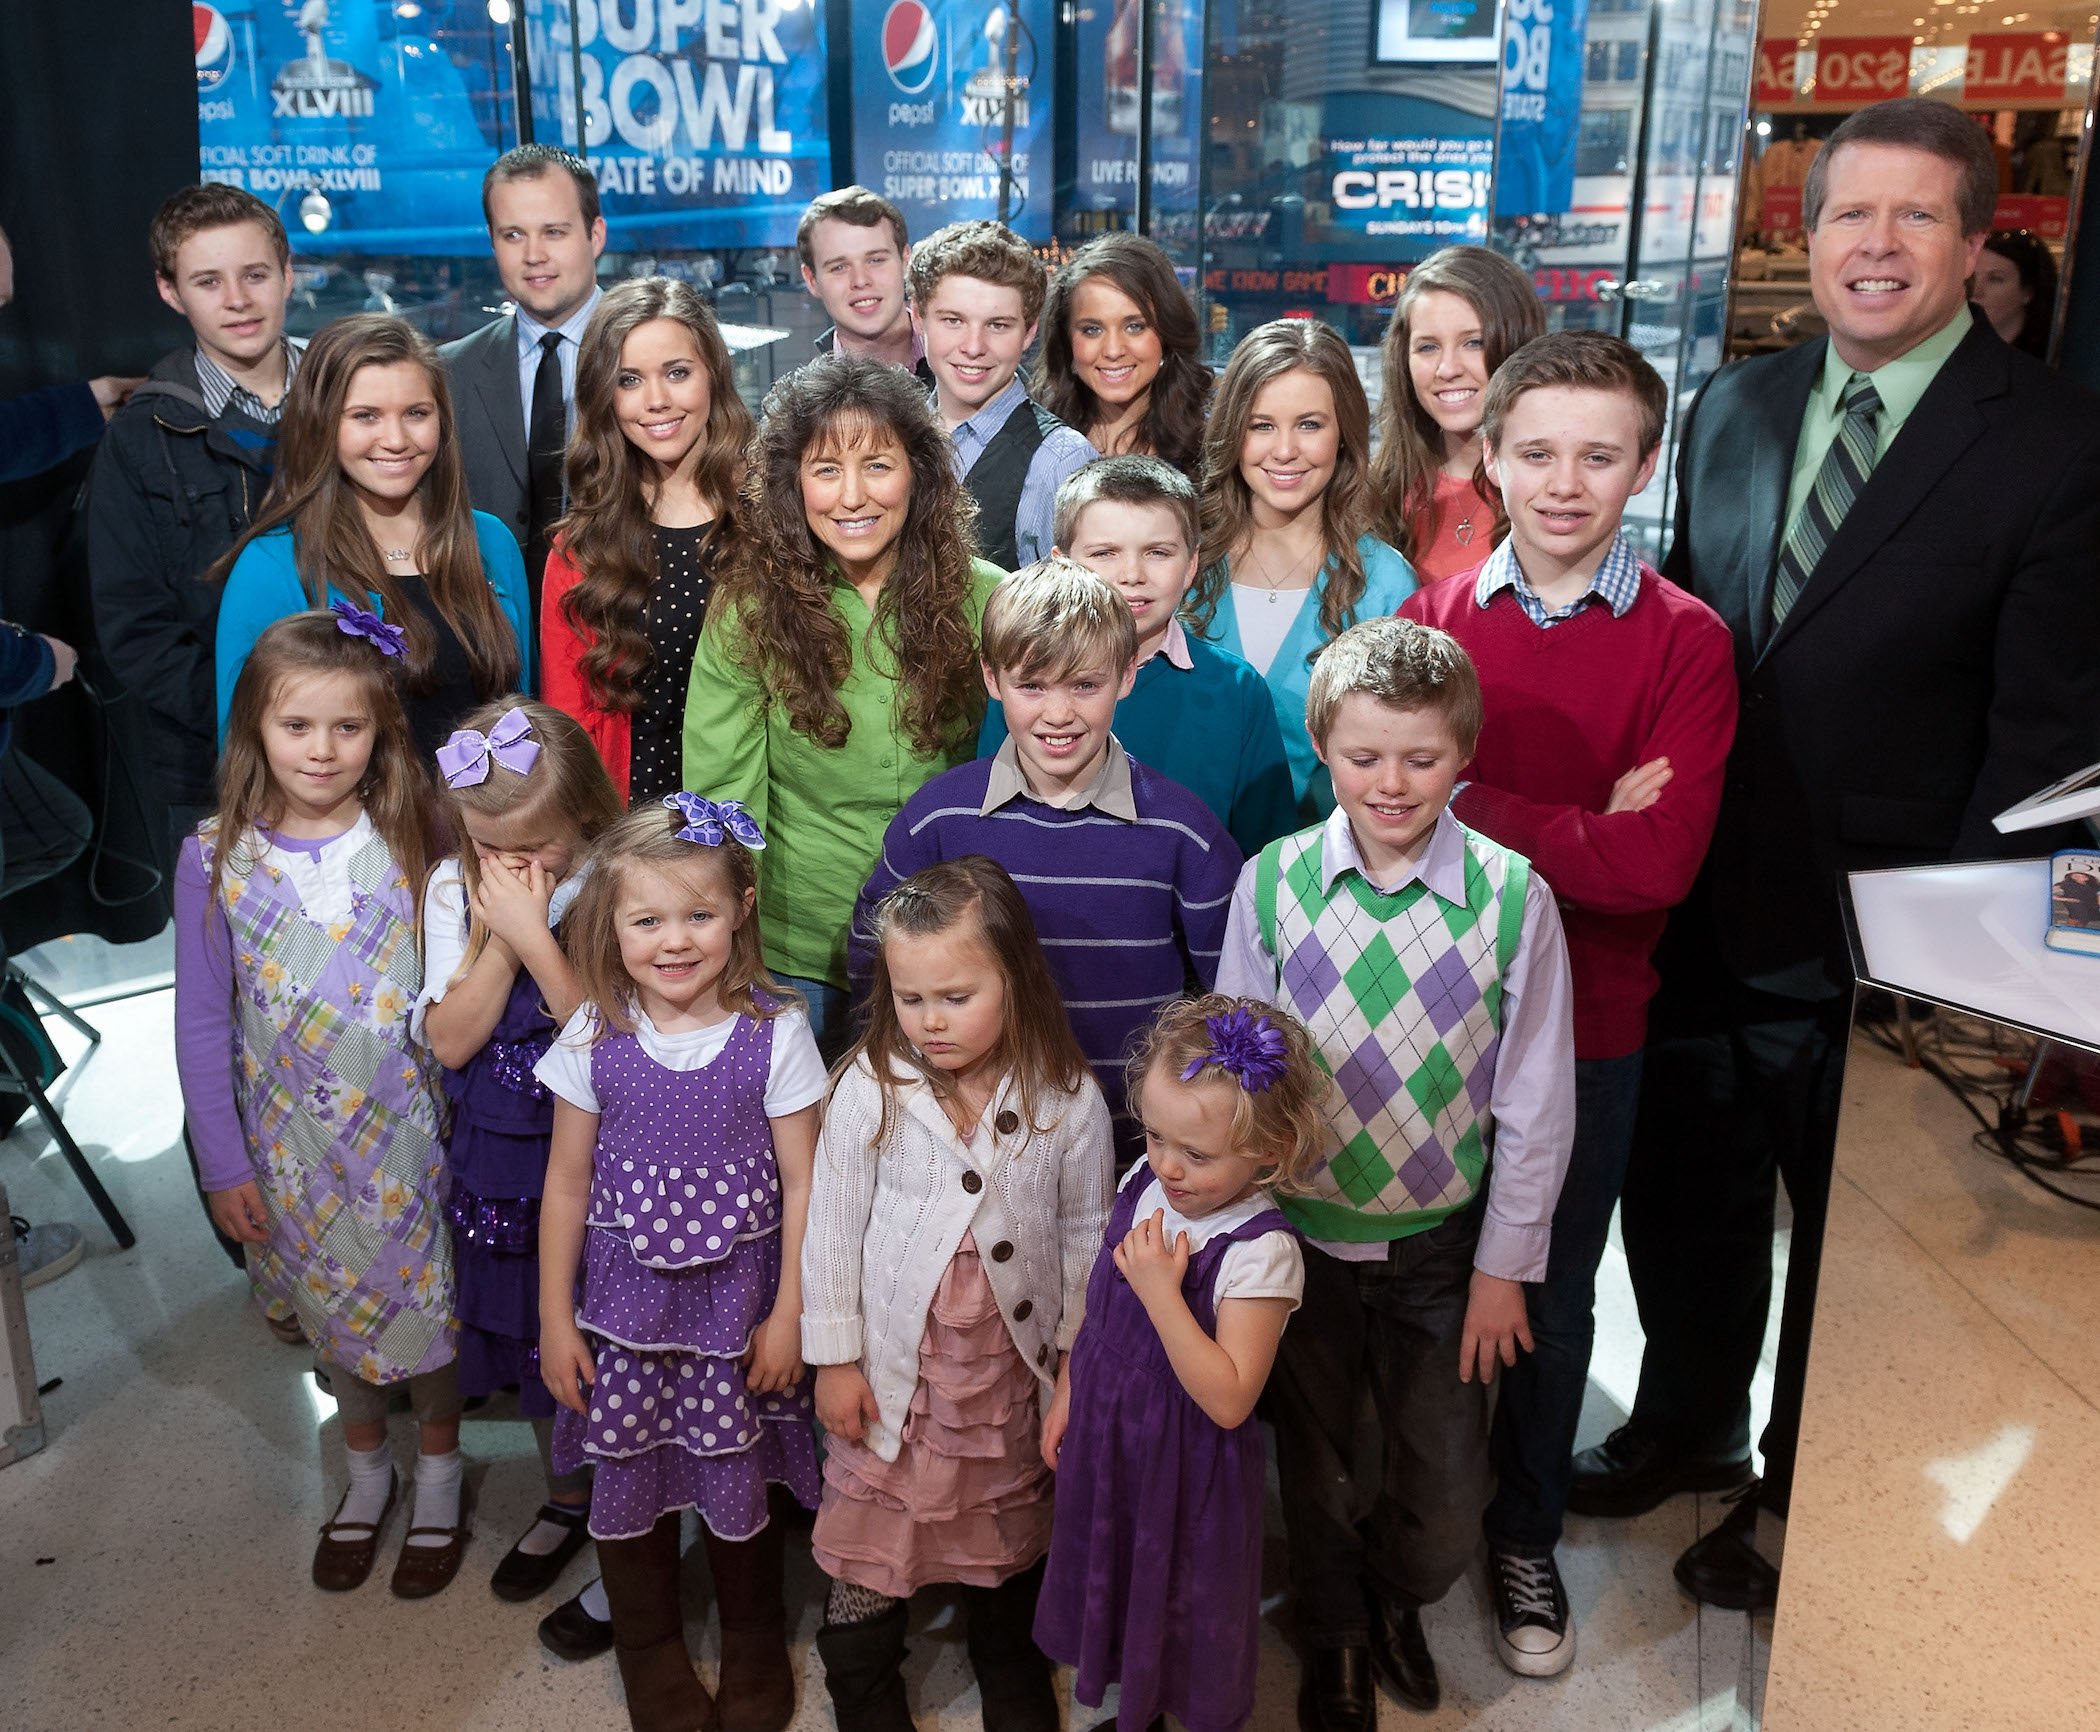 The Duggar family, including Josh Duggar, all standing together smiling while visiting 'Extra.' Josh Duggar news now dominates the headlines in 2021.